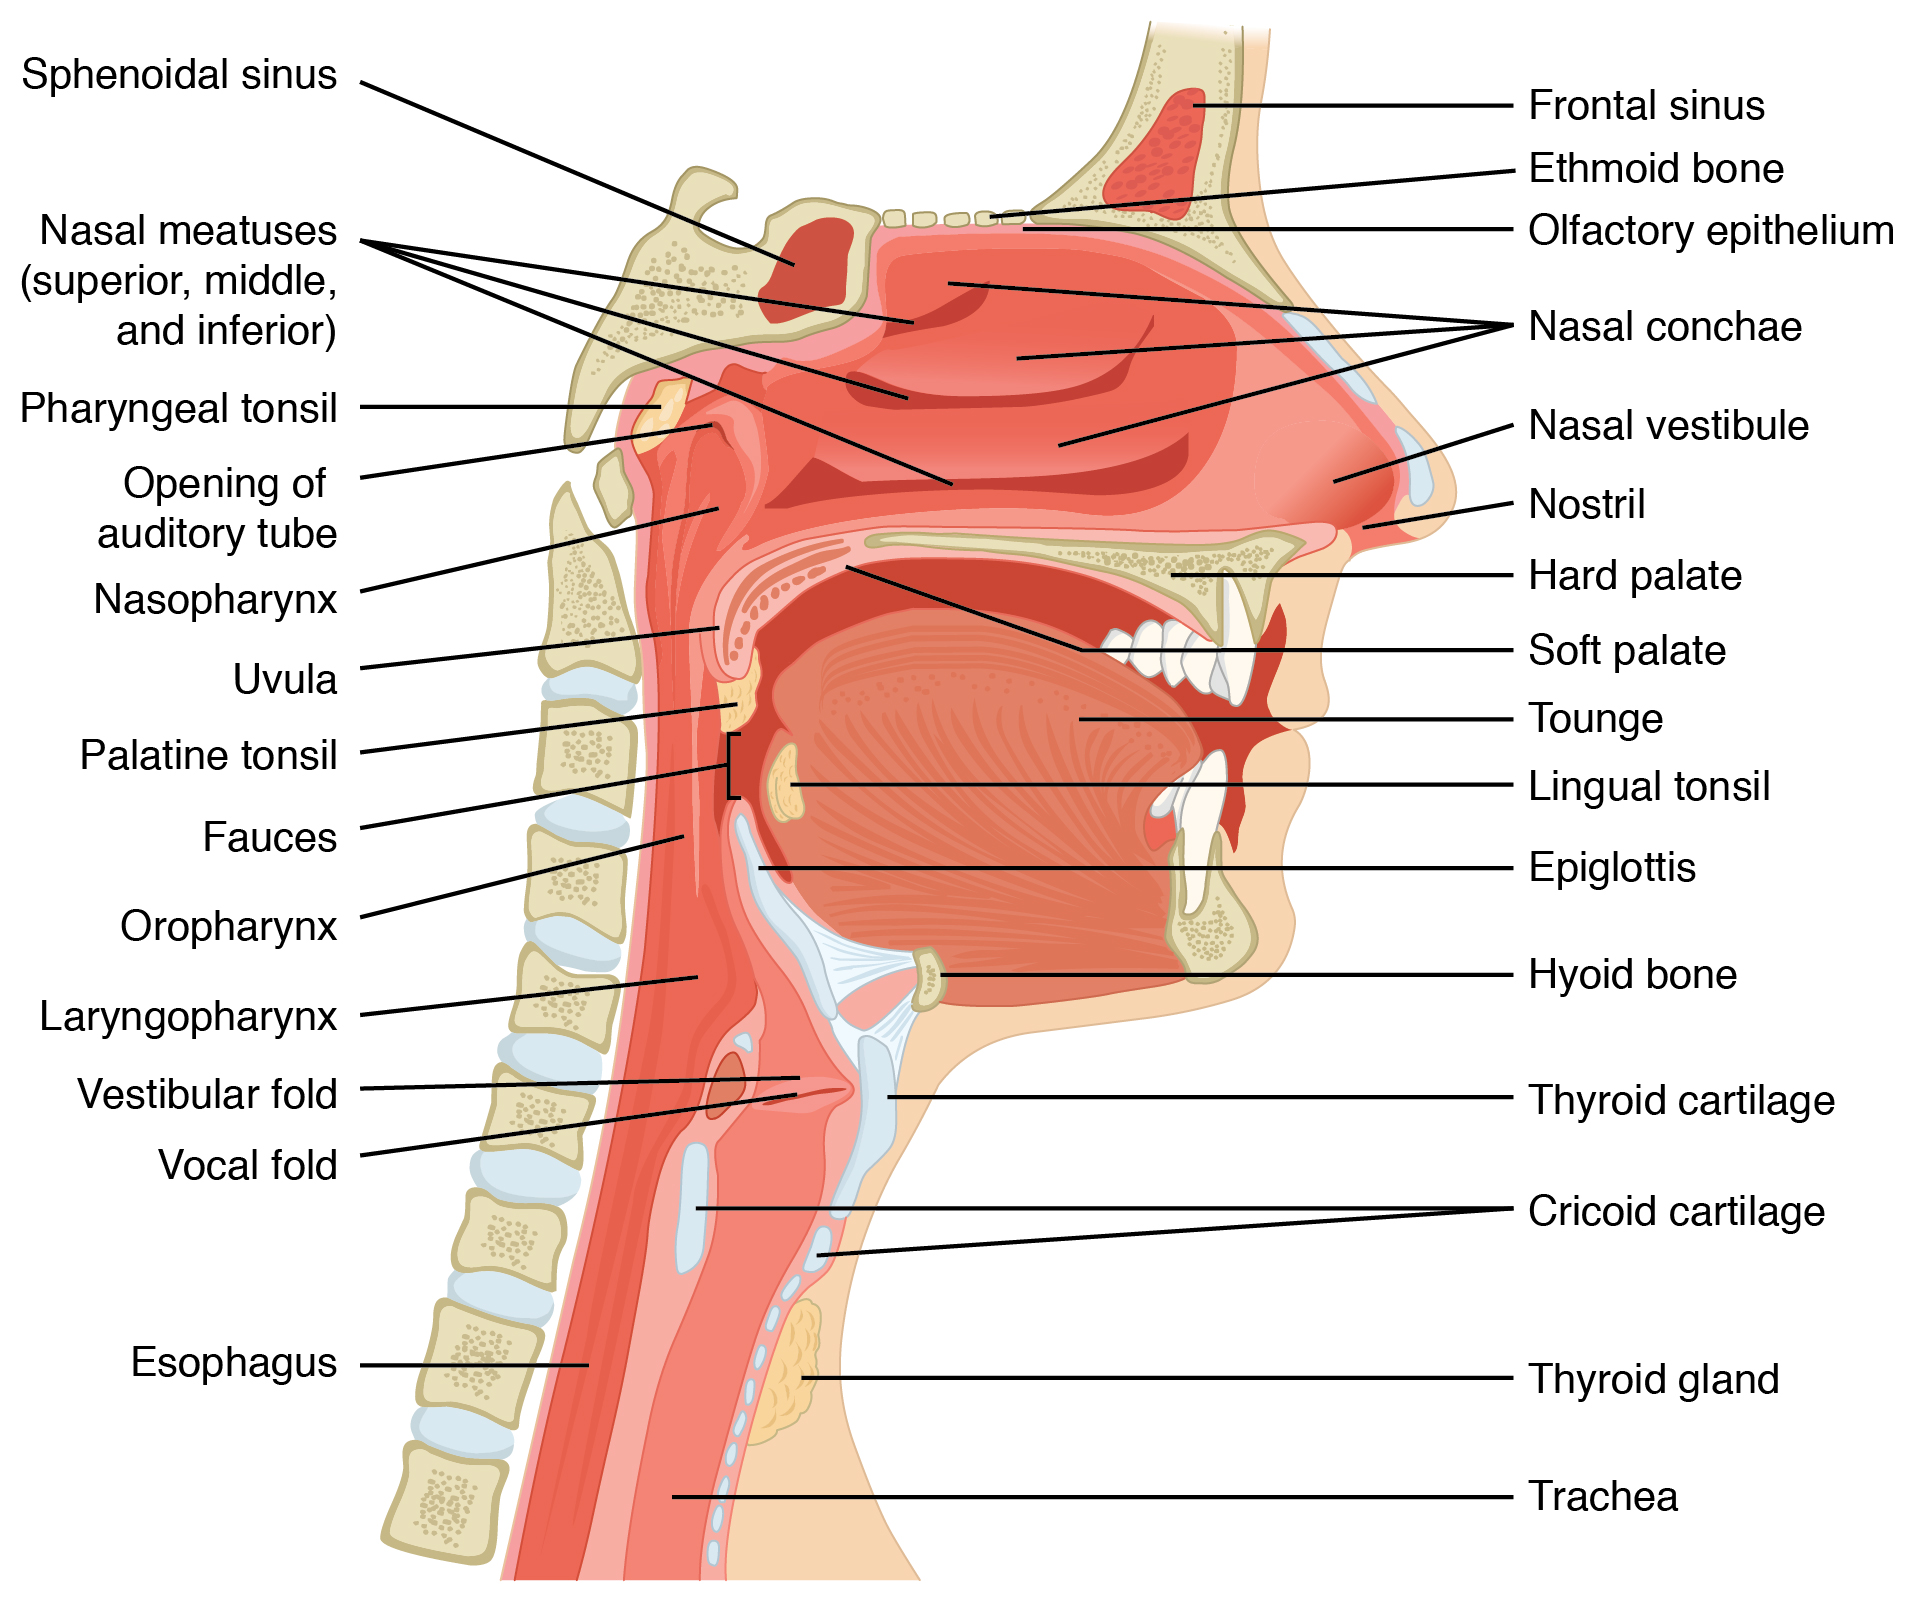 Diagram of the upper airway. Image description available.